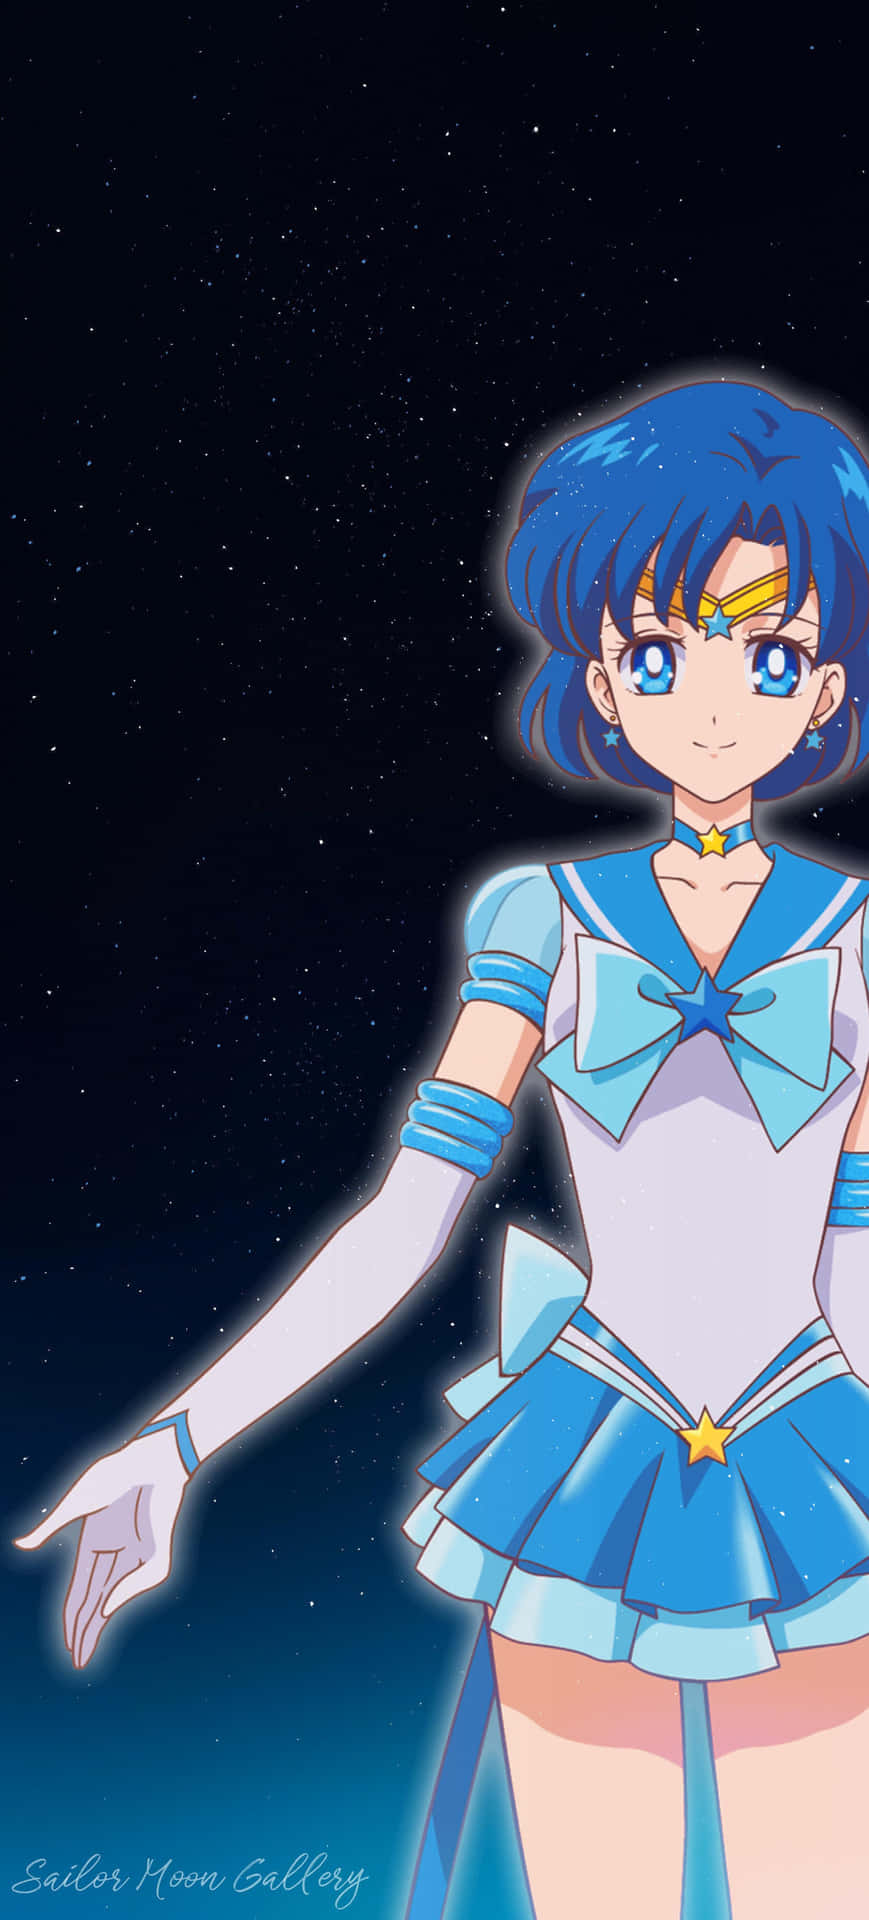 Sailor Mercury, A Guardian Of Love And Justice